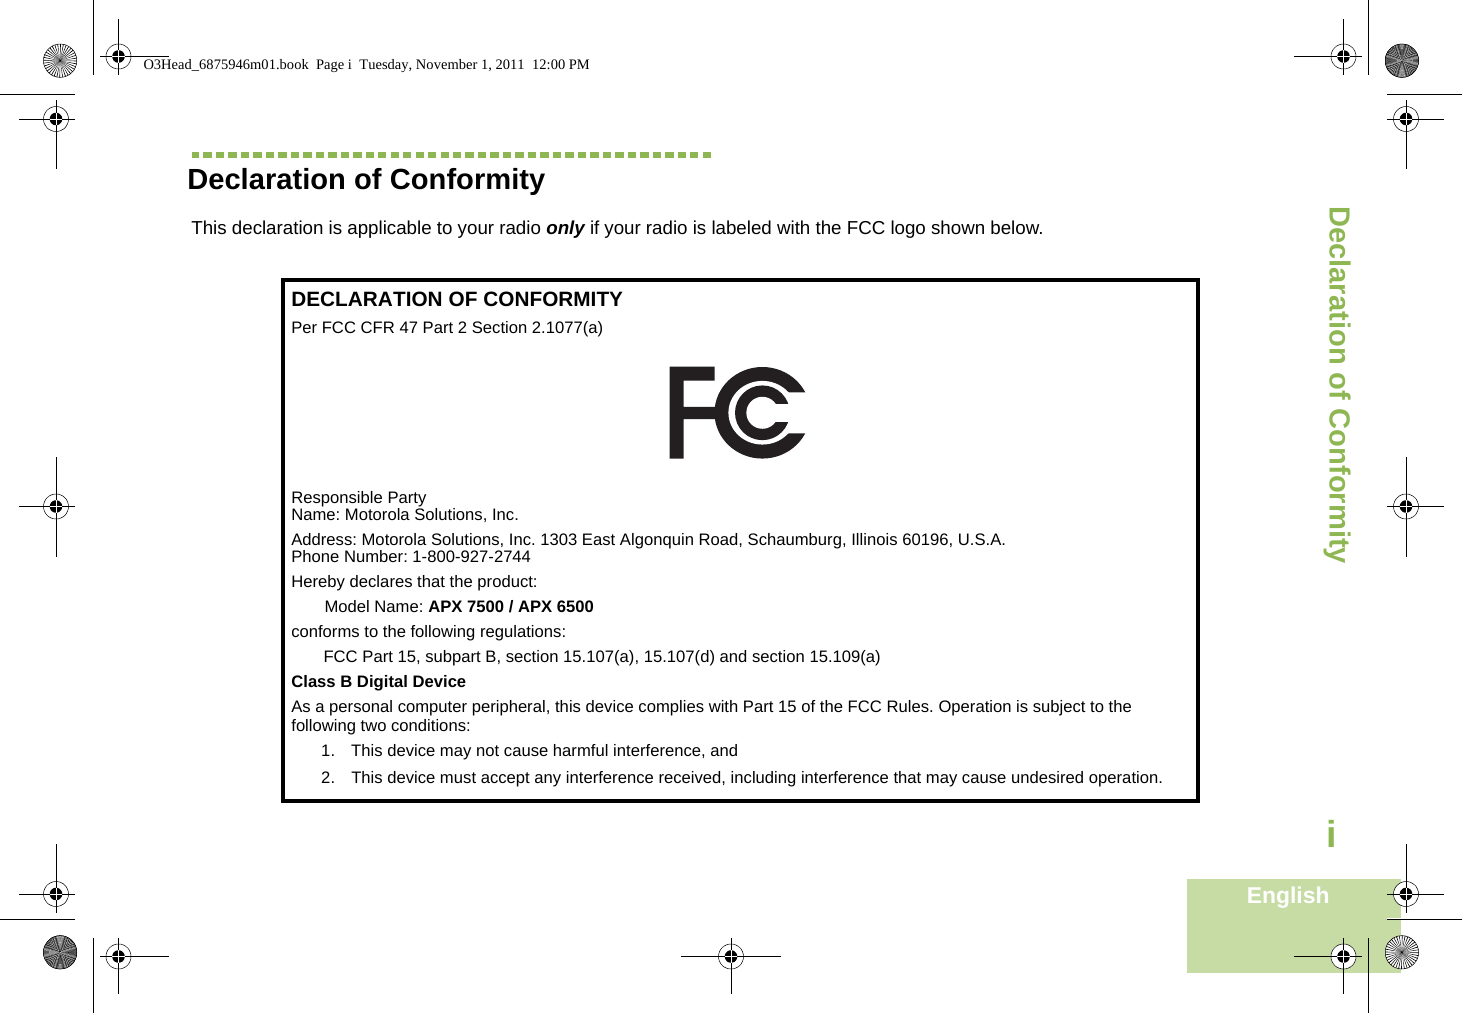 Declaration of ConformityEnglishiDeclaration of ConformityThis declaration is applicable to your radio only if your radio is labeled with the FCC logo shown below.DECLARATION OF CONFORMITYPer FCC CFR 47 Part 2 Section 2.1077(a)Responsible Party Name: Motorola Solutions, Inc.Address: Motorola Solutions, Inc. 1303 East Algonquin Road, Schaumburg, Illinois 60196, U.S.A.Phone Number: 1-800-927-2744Hereby declares that the product:Model Name: APX 7500 / APX 6500conforms to the following regulations:FCC Part 15, subpart B, section 15.107(a), 15.107(d) and section 15.109(a)Class B Digital DeviceAs a personal computer peripheral, this device complies with Part 15 of the FCC Rules. Operation is subject to the following two conditions:1. This device may not cause harmful interference, and 2. This device must accept any interference received, including interference that may cause undesired operation.O3Head_6875946m01.book  Page i  Tuesday, November 1, 2011  12:00 PM